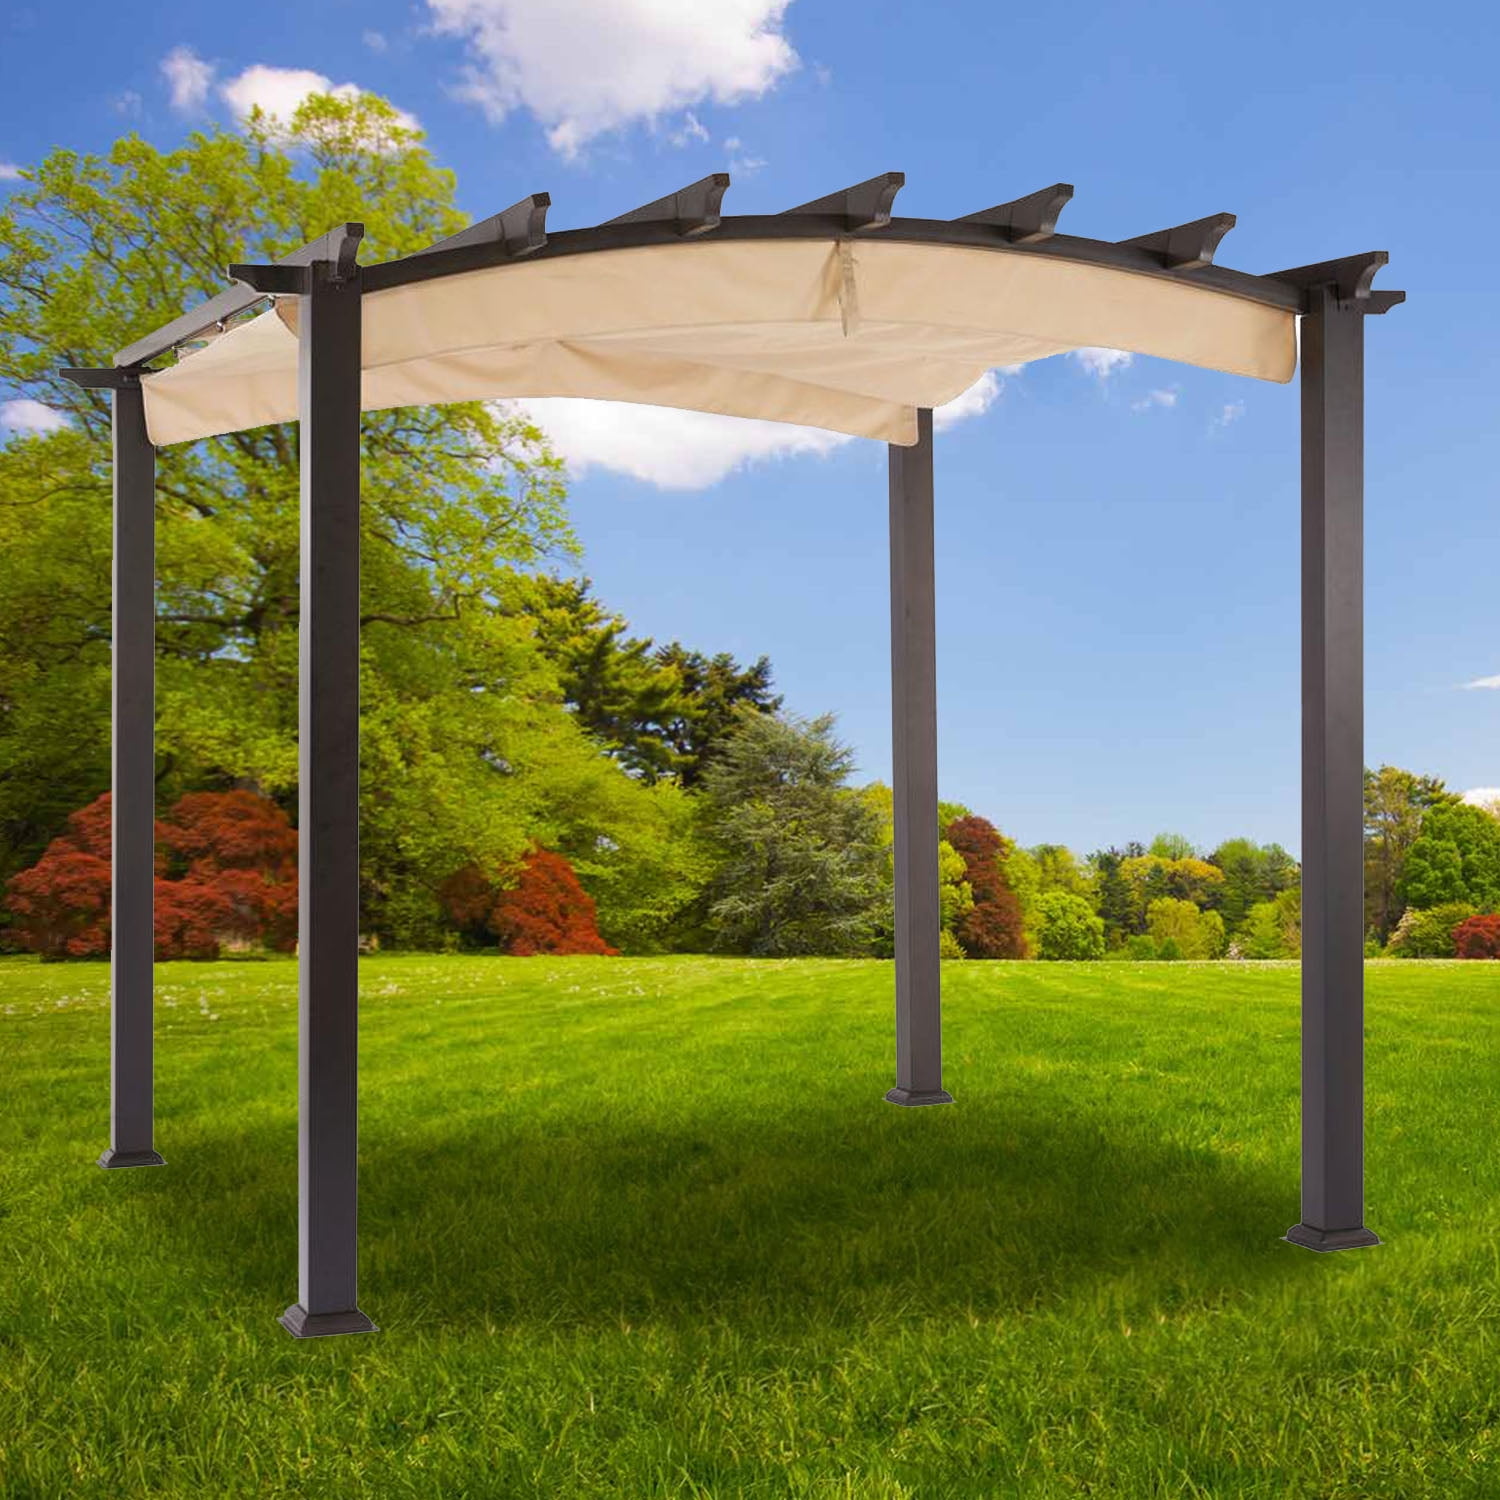 Garden Winds Replacement Canopy Top For Hampton Bay Arched Pergola